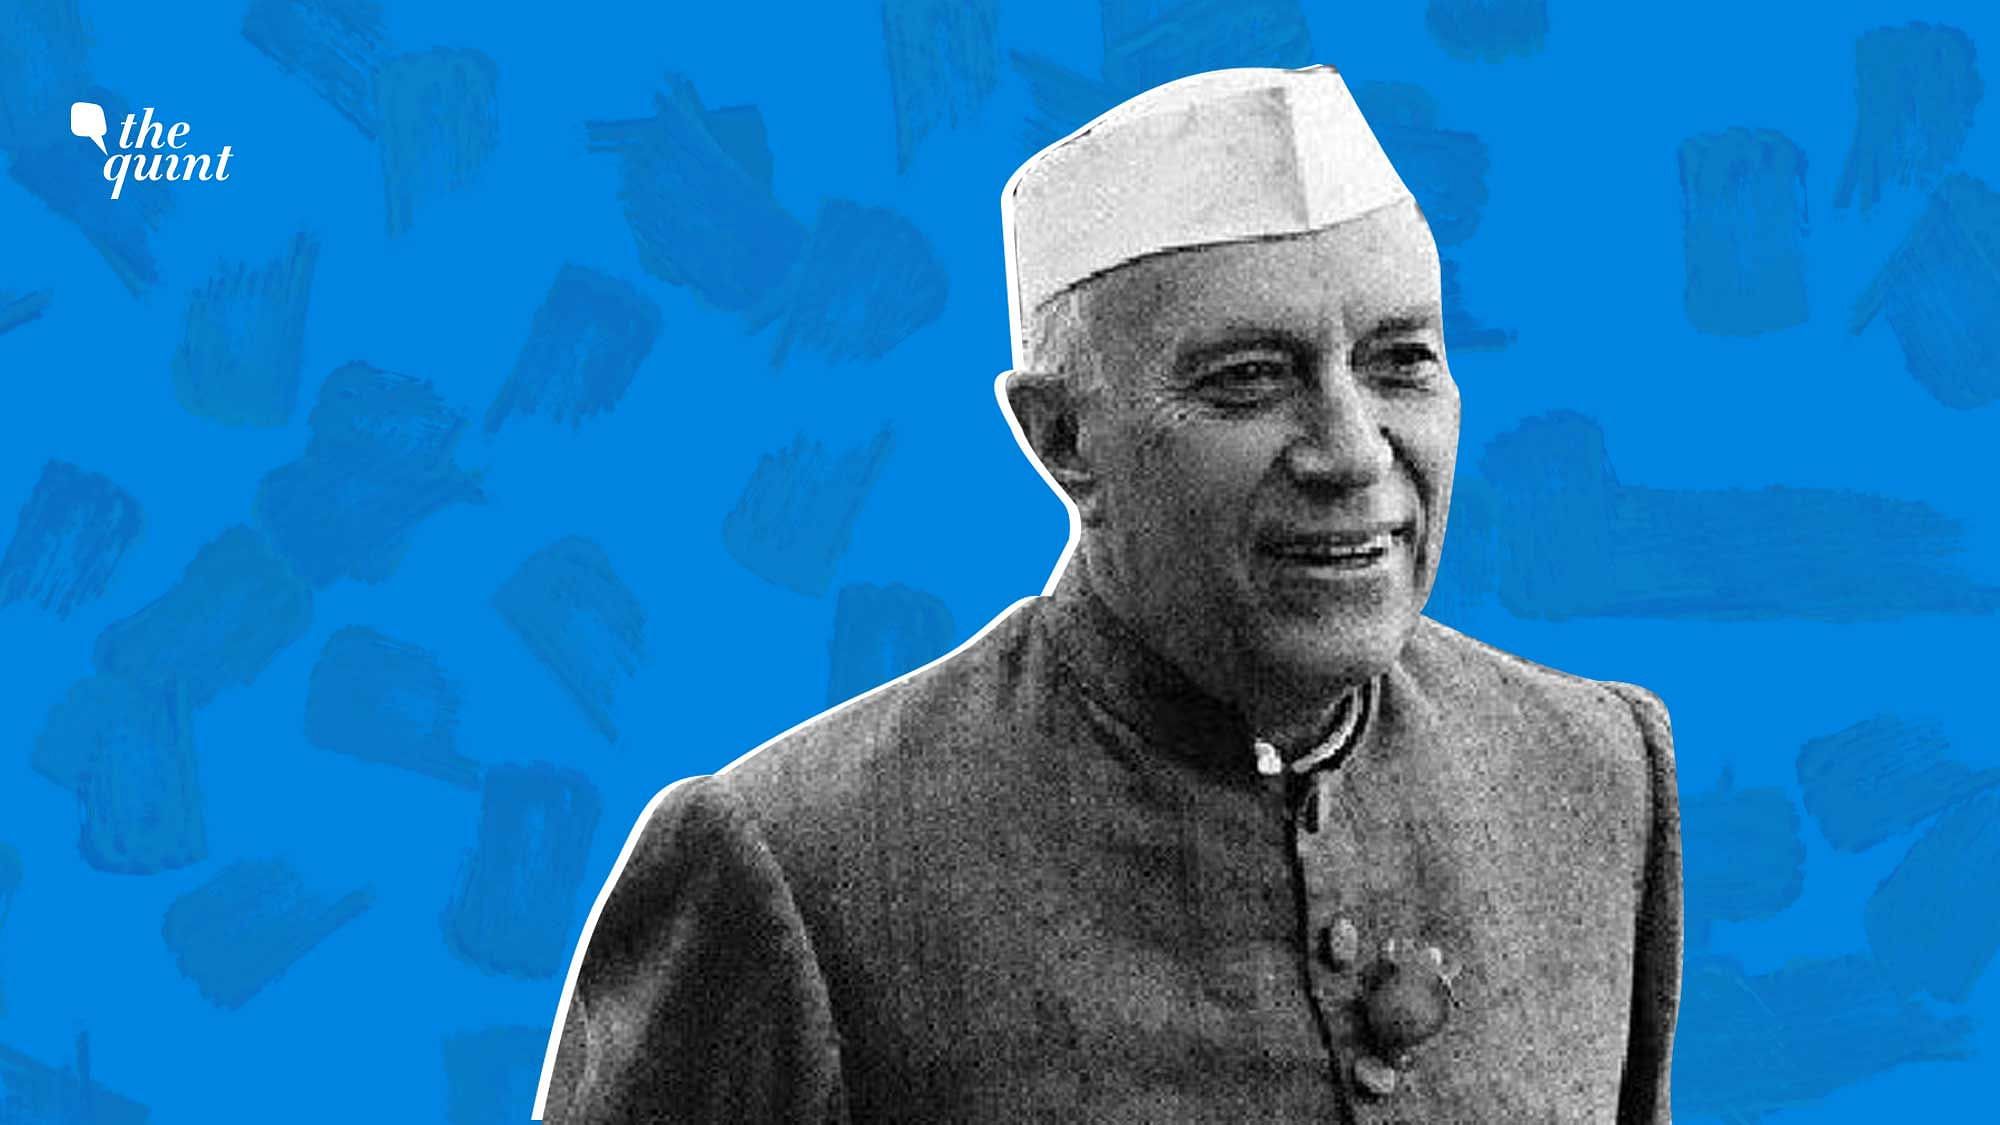 India’s first Prime Minister Jawaharlal Nehru.